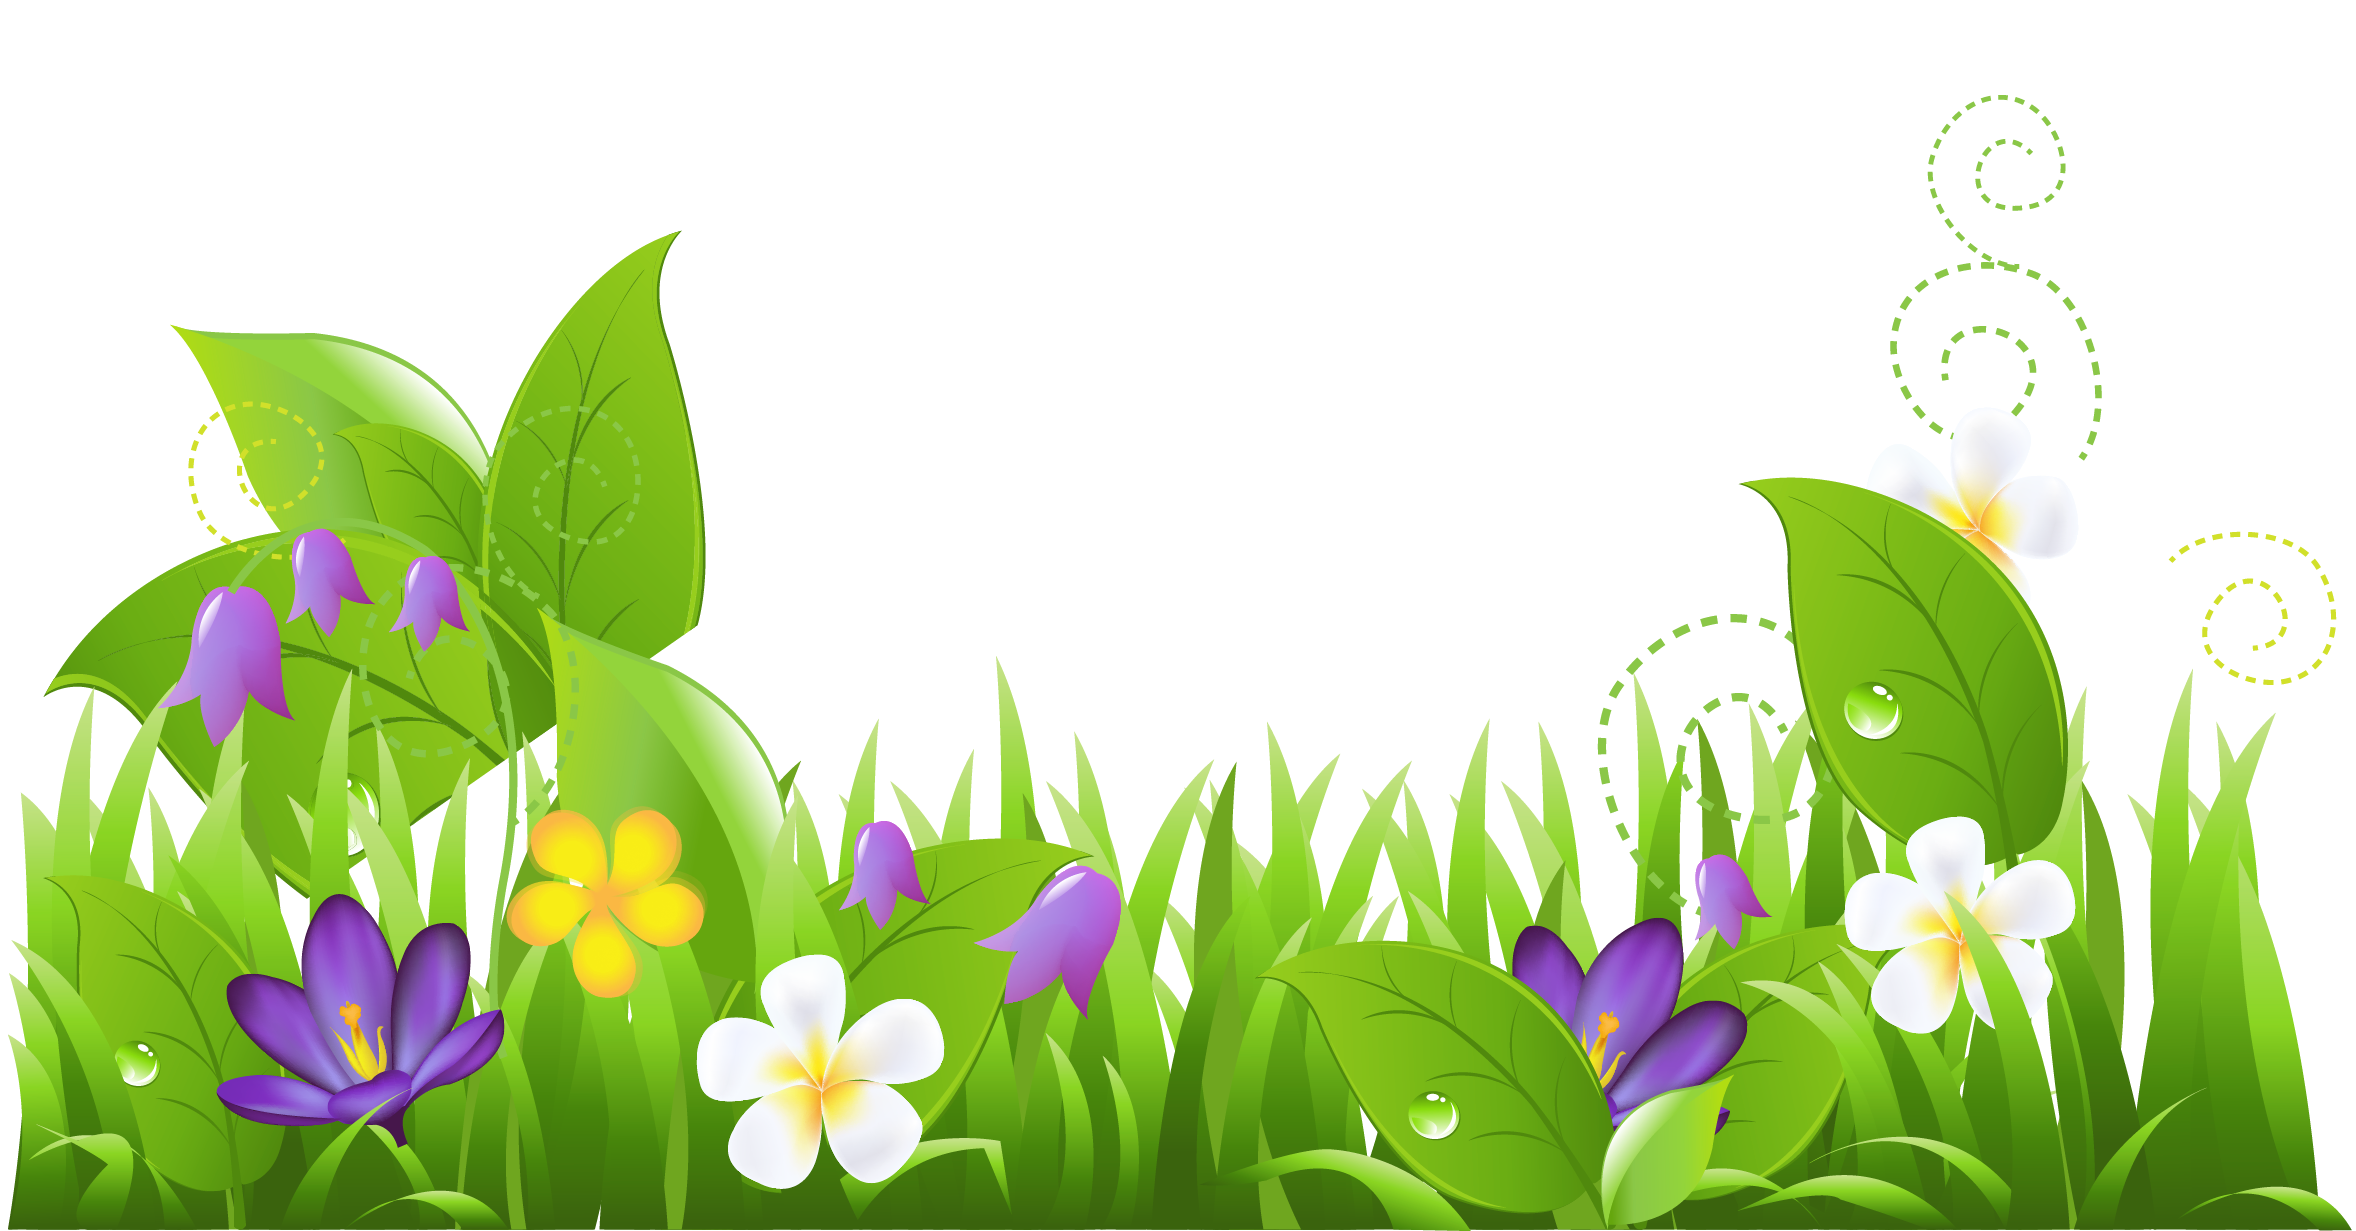 Grass and Flowers PNG Clipart